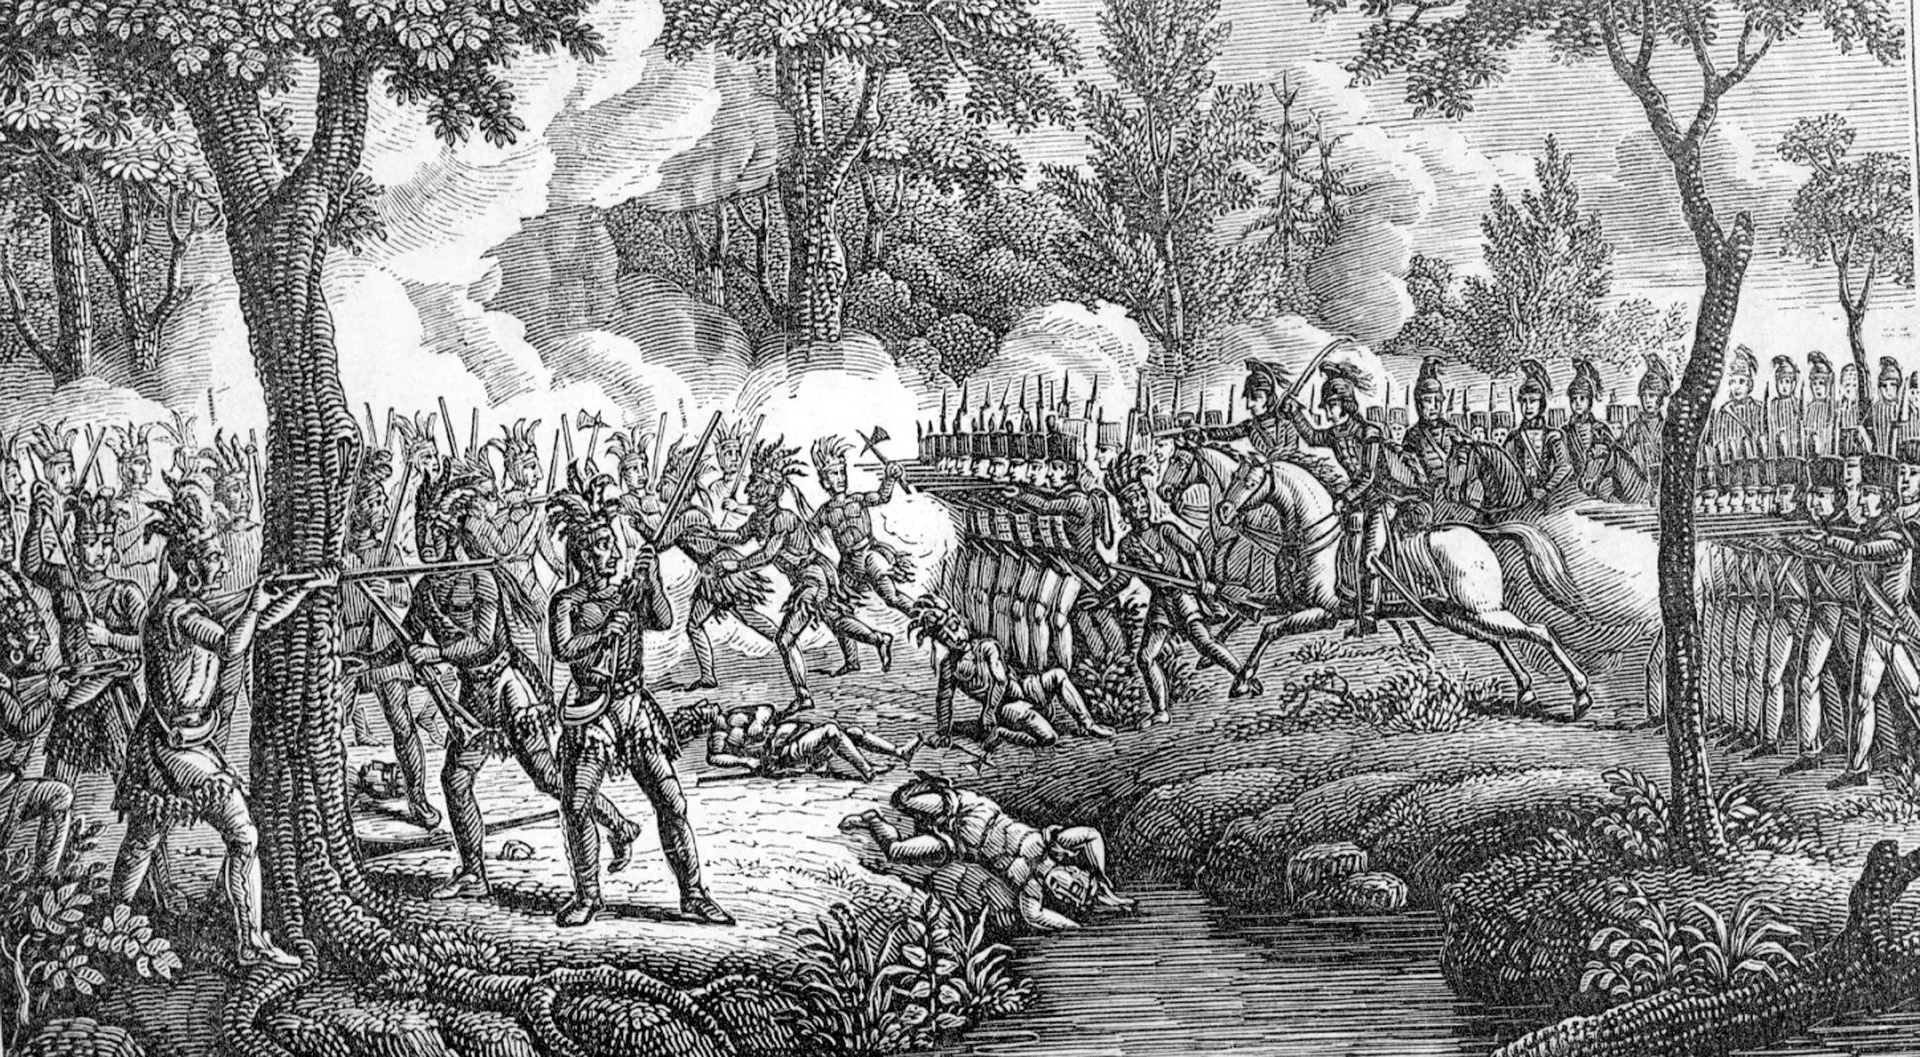 A sketch of the battle. Wayne ordered attack by bayonet, the soldiers to use musket fire only when the Indians were fleeing. 